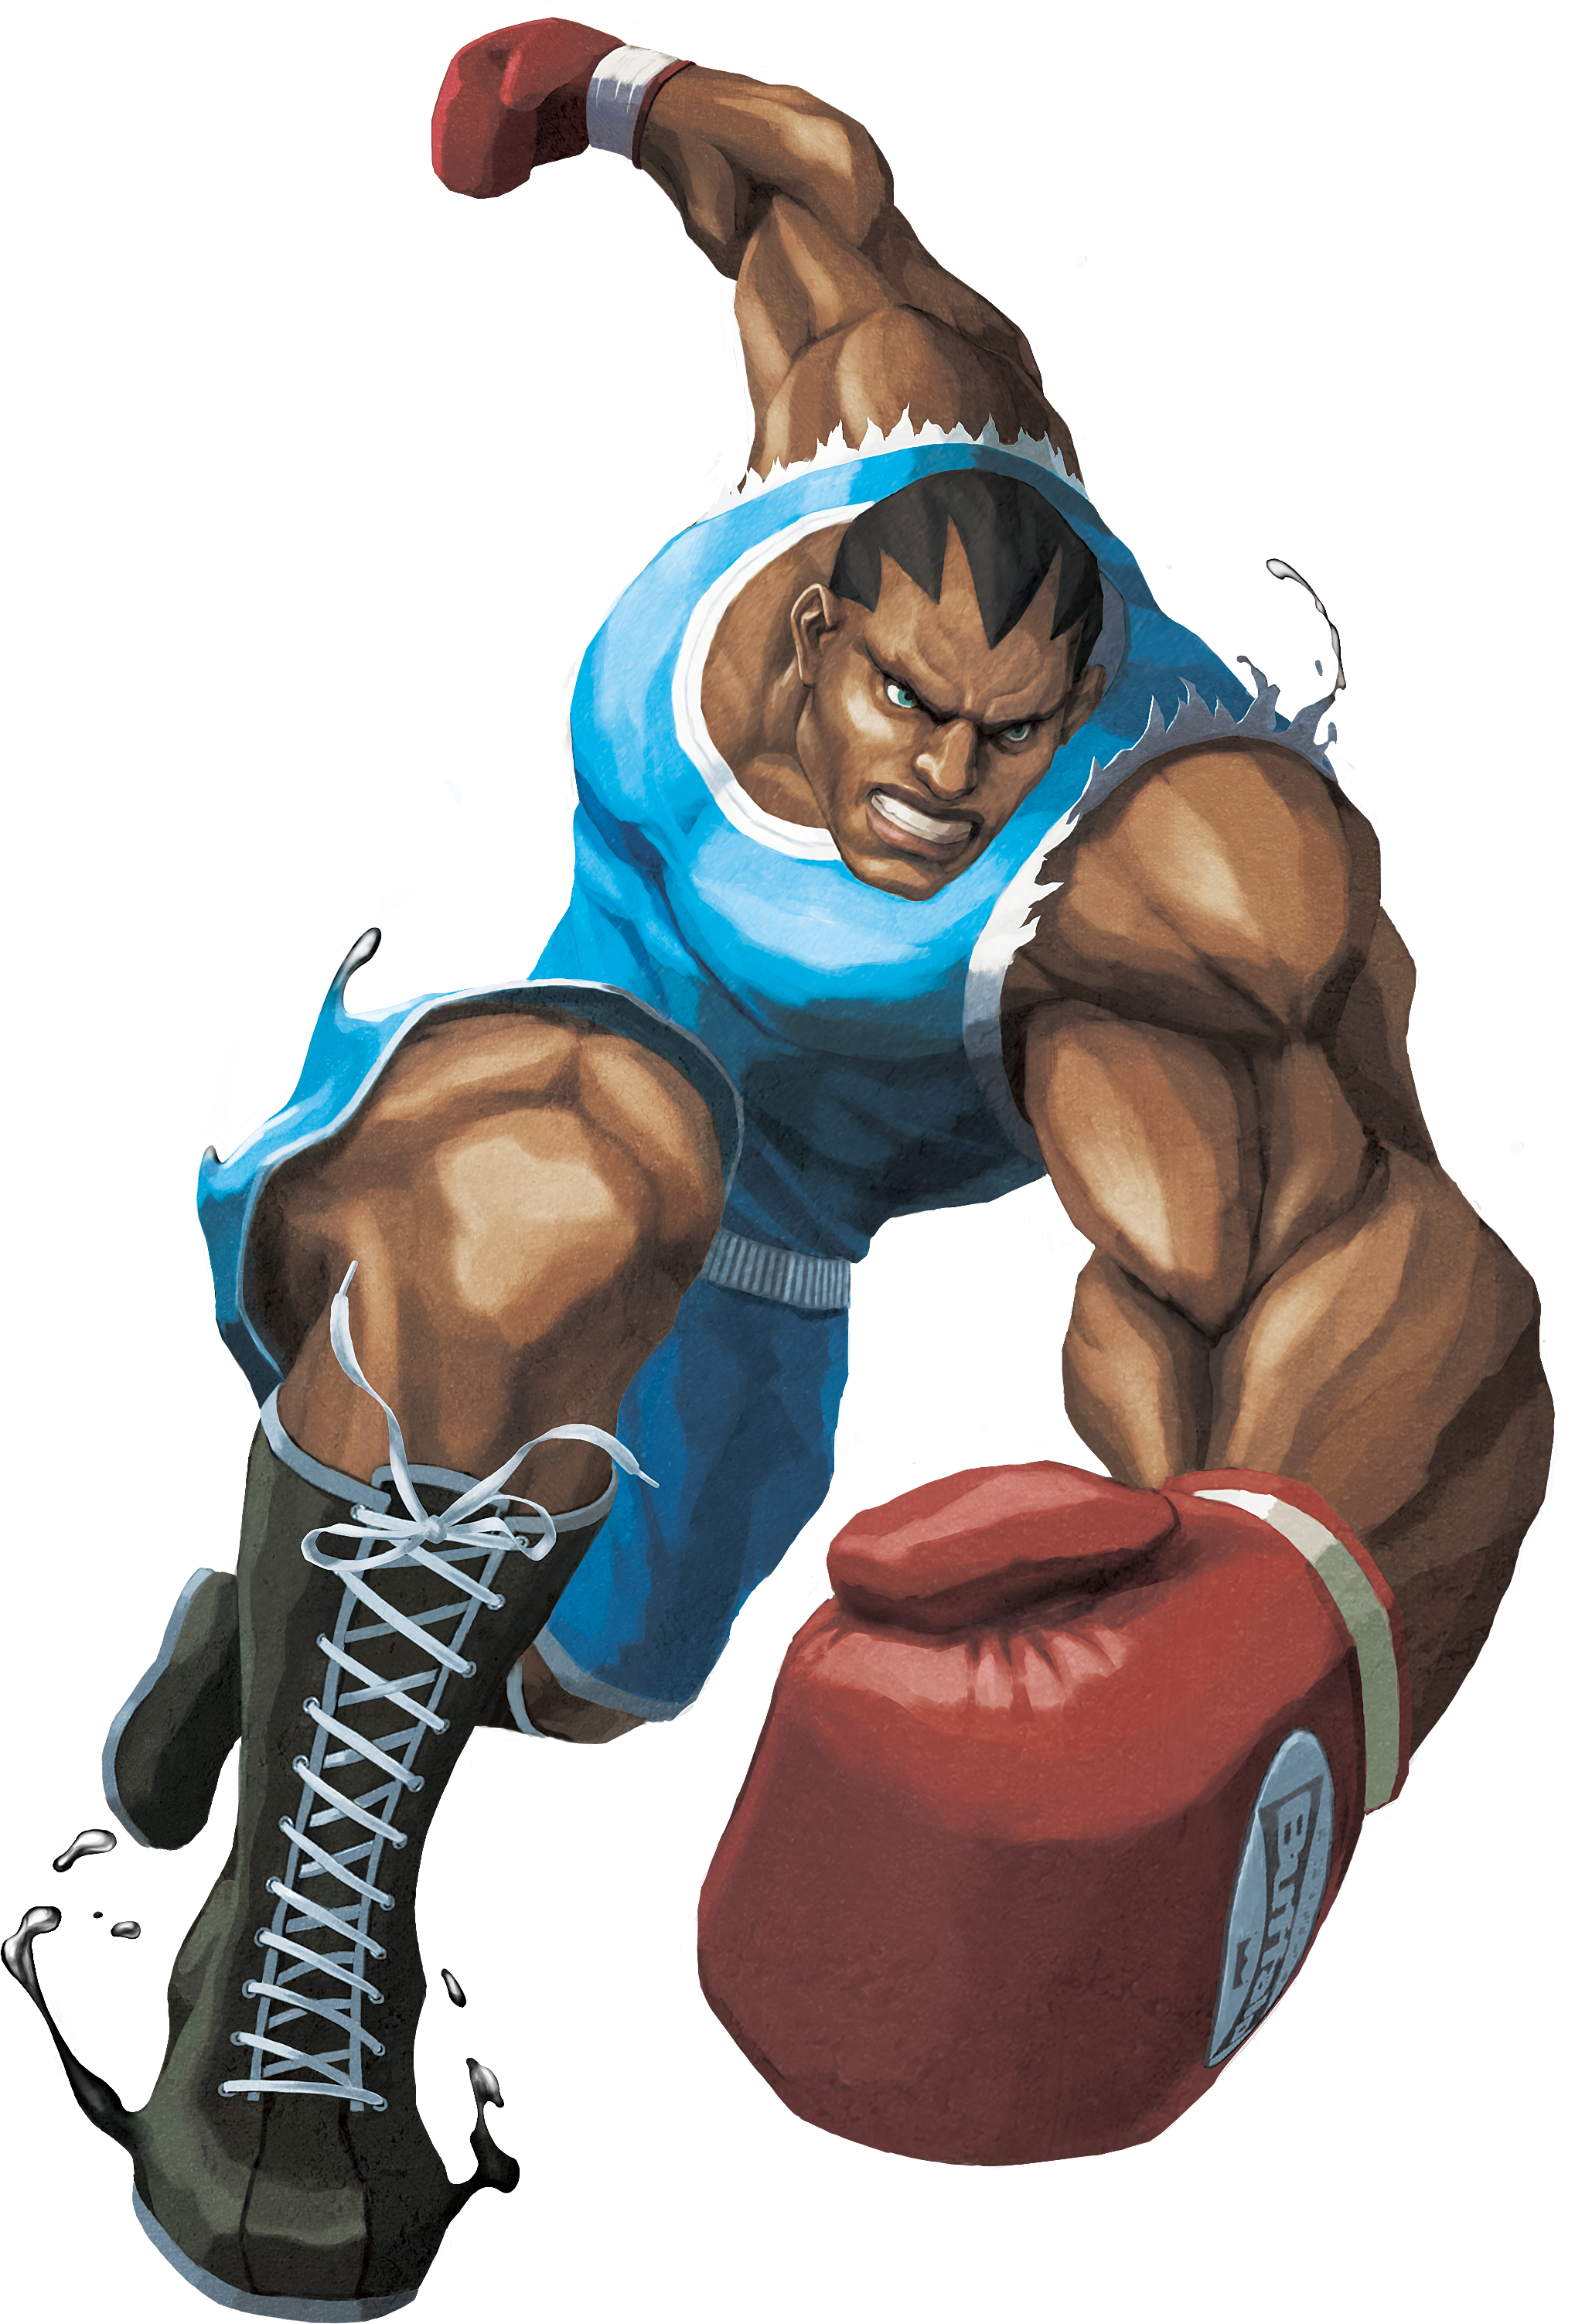 Balrog - Vega - Street Fighters - Character profile - Second take 